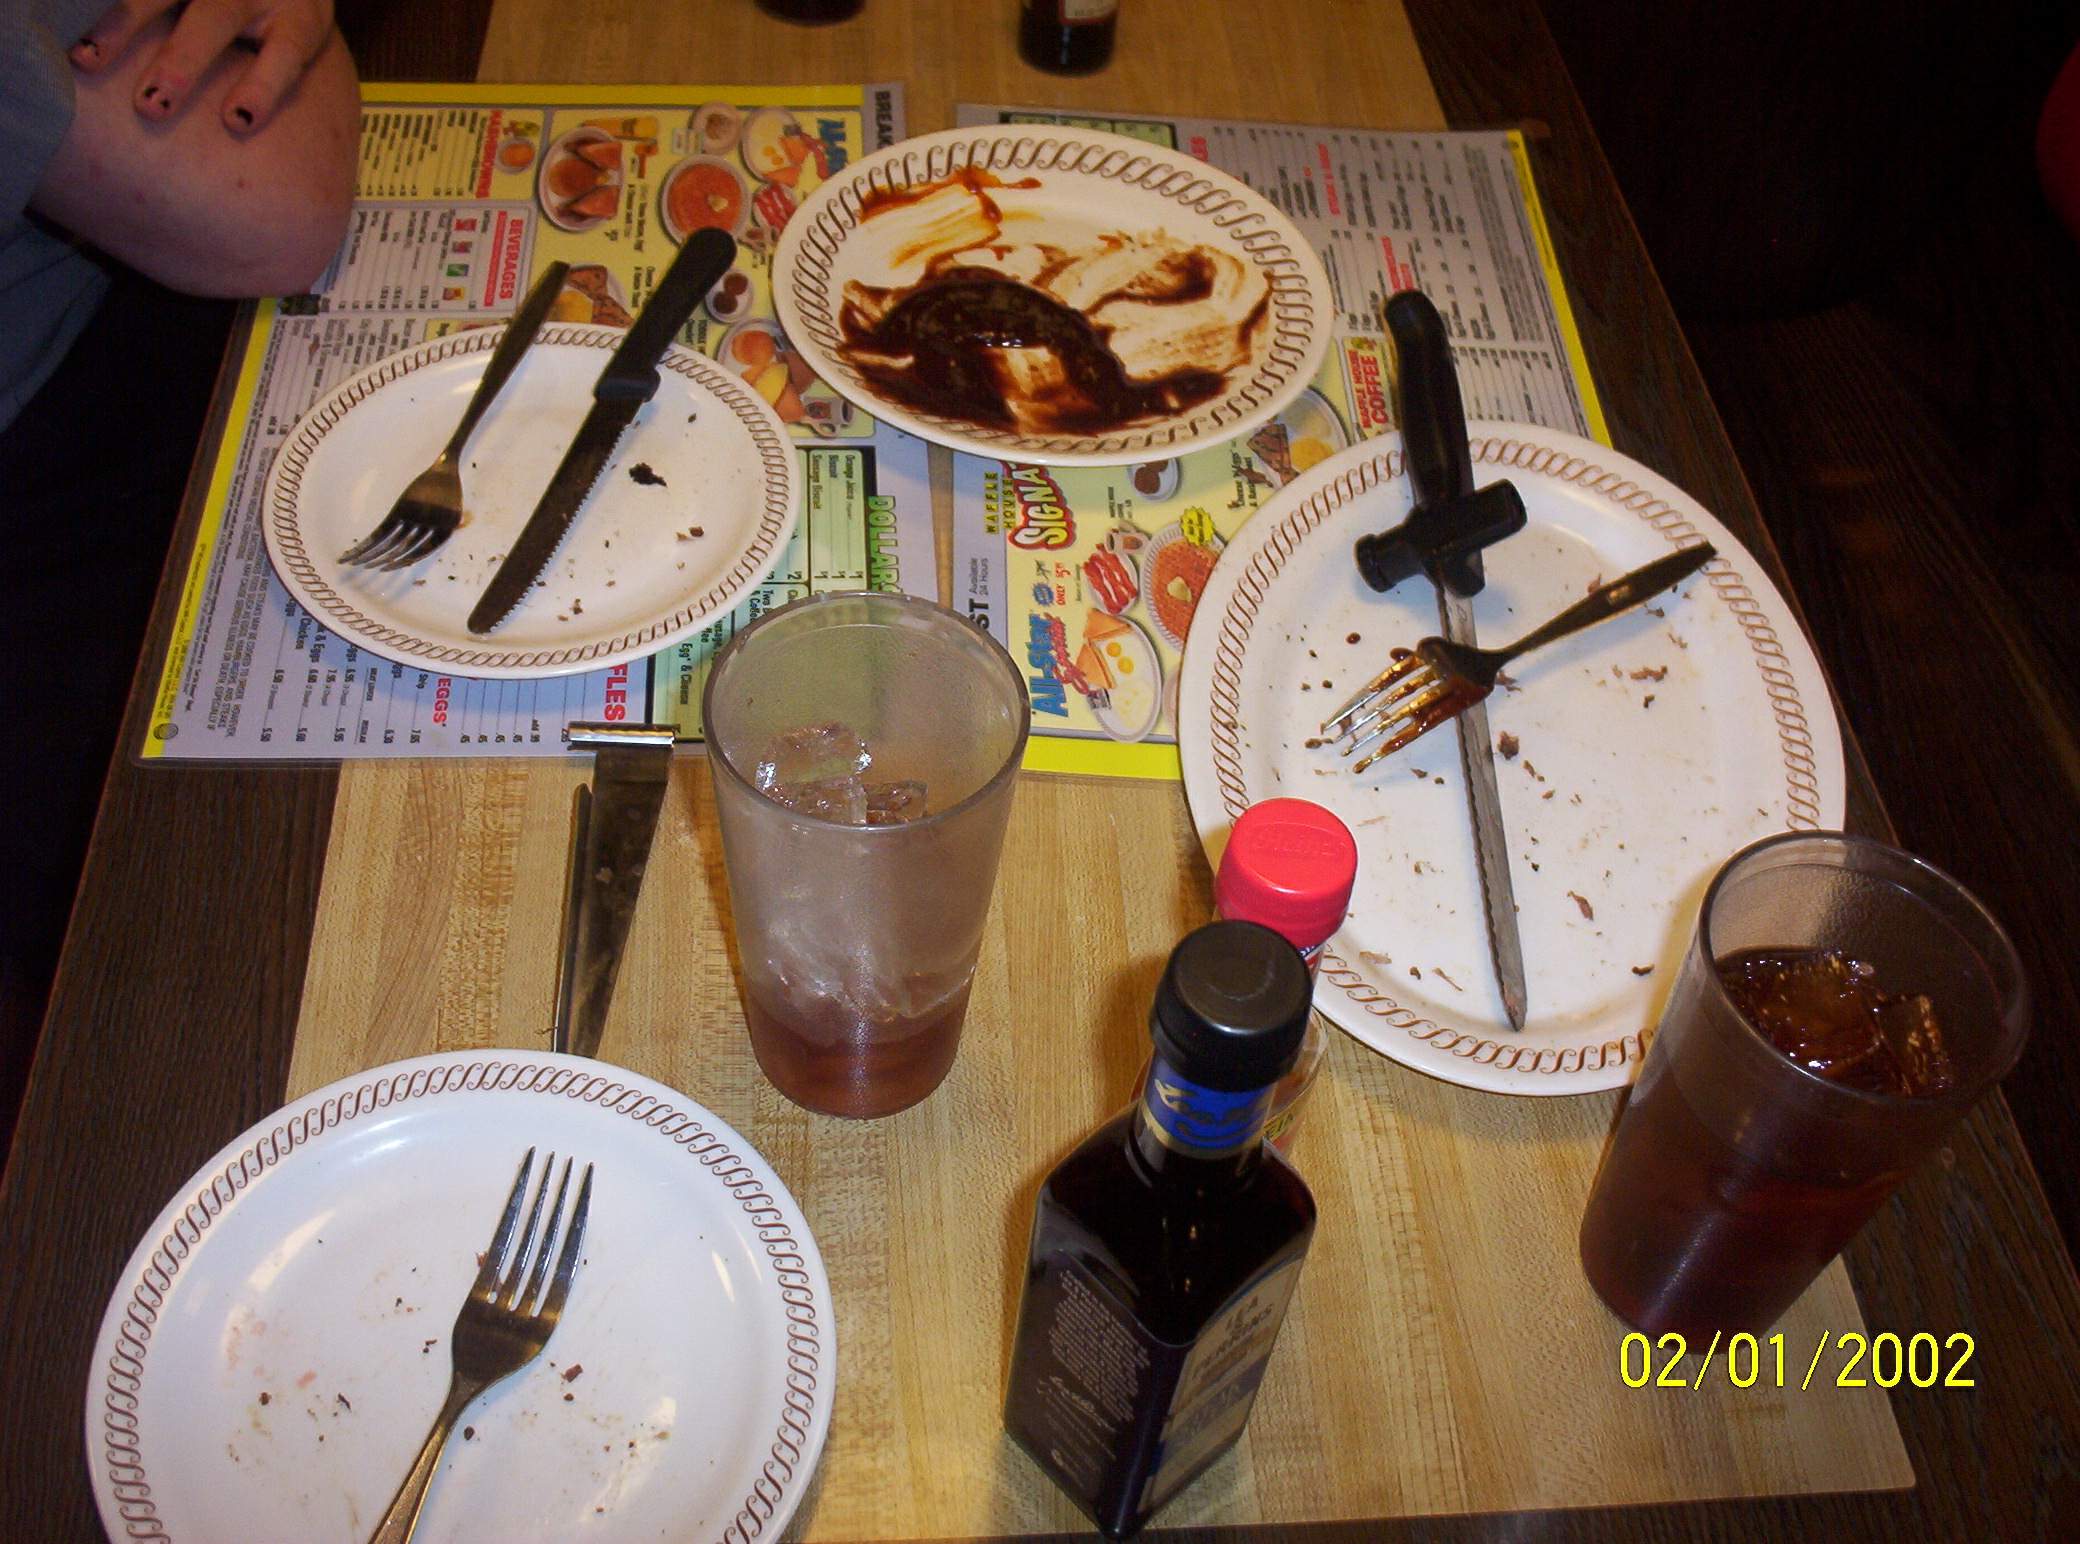 Dinner at Waffle House